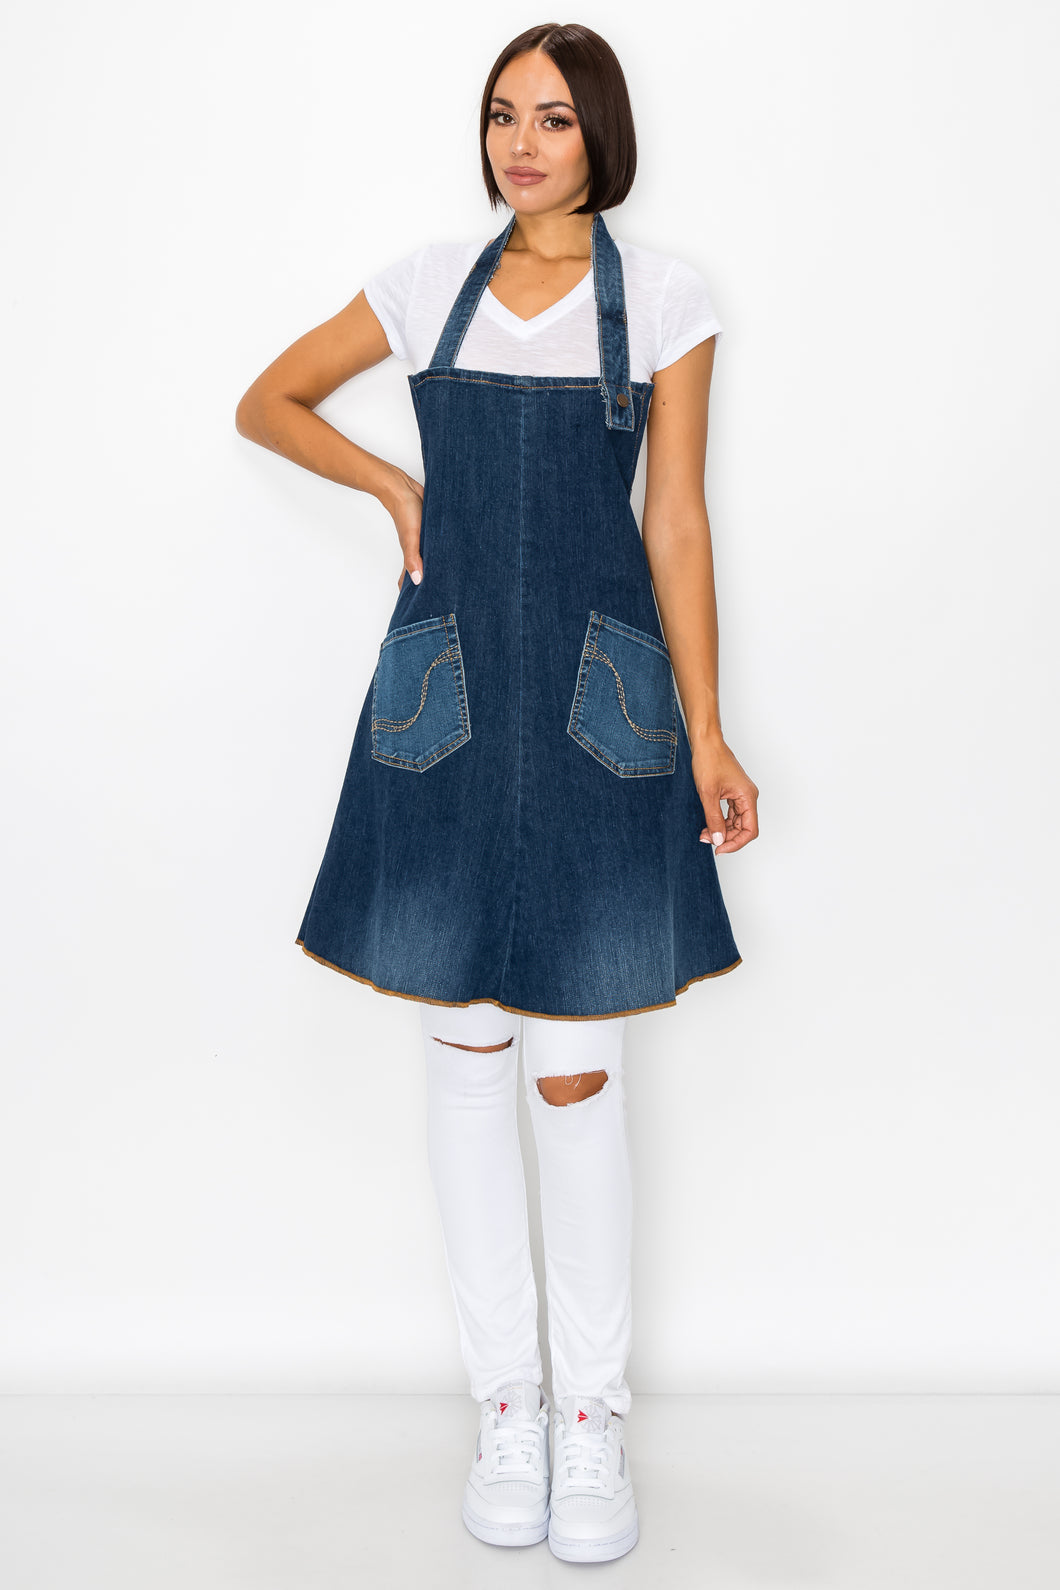 One of a Kind, Recycled Denim Apron